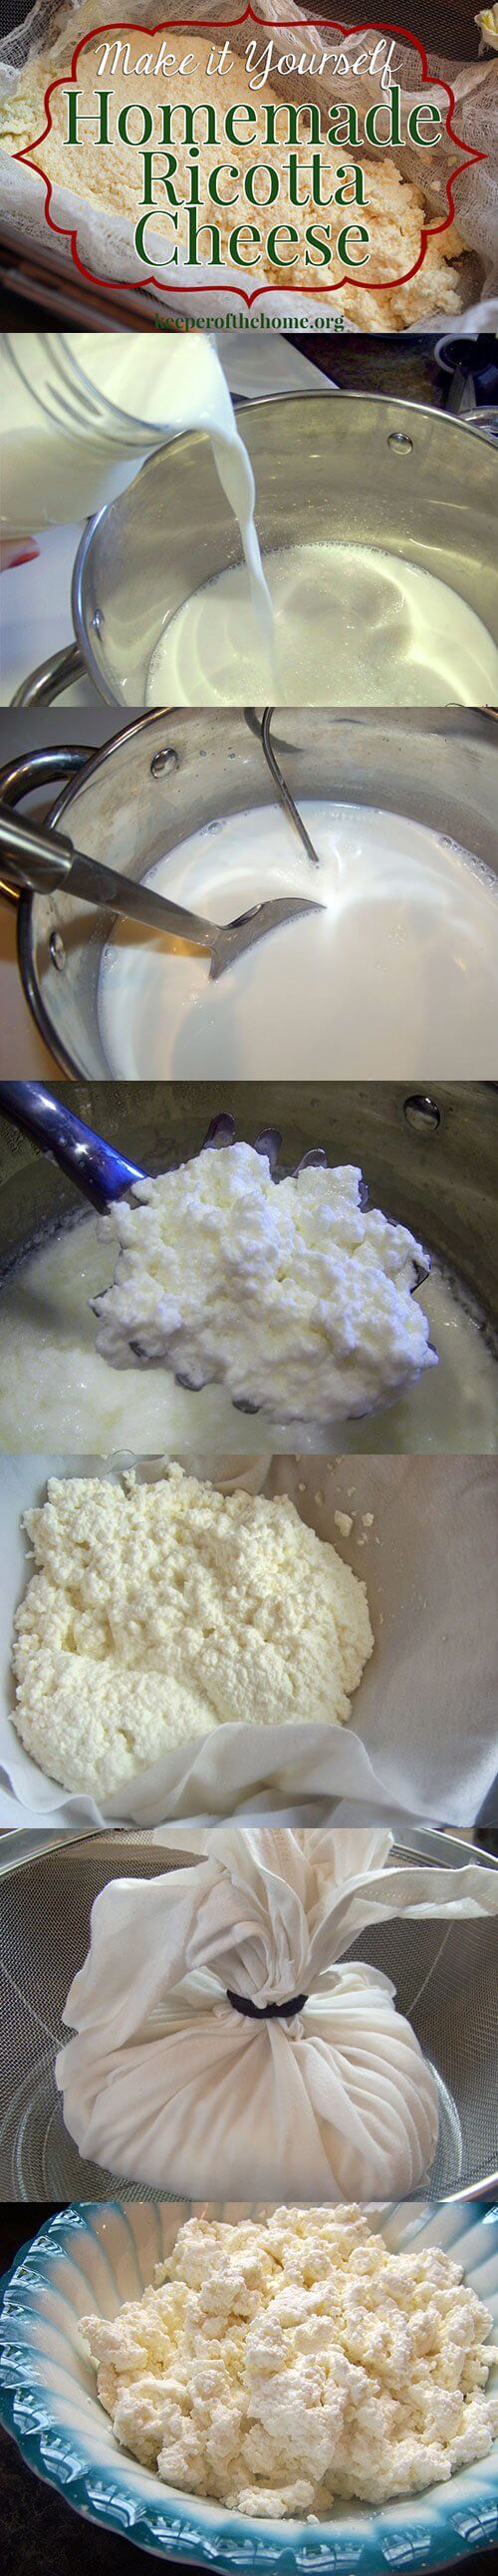 Love ricotta cheese but not the price or food additives? Here's how to make your own homemade ricotta cheese – even better than the tubs at the store! 